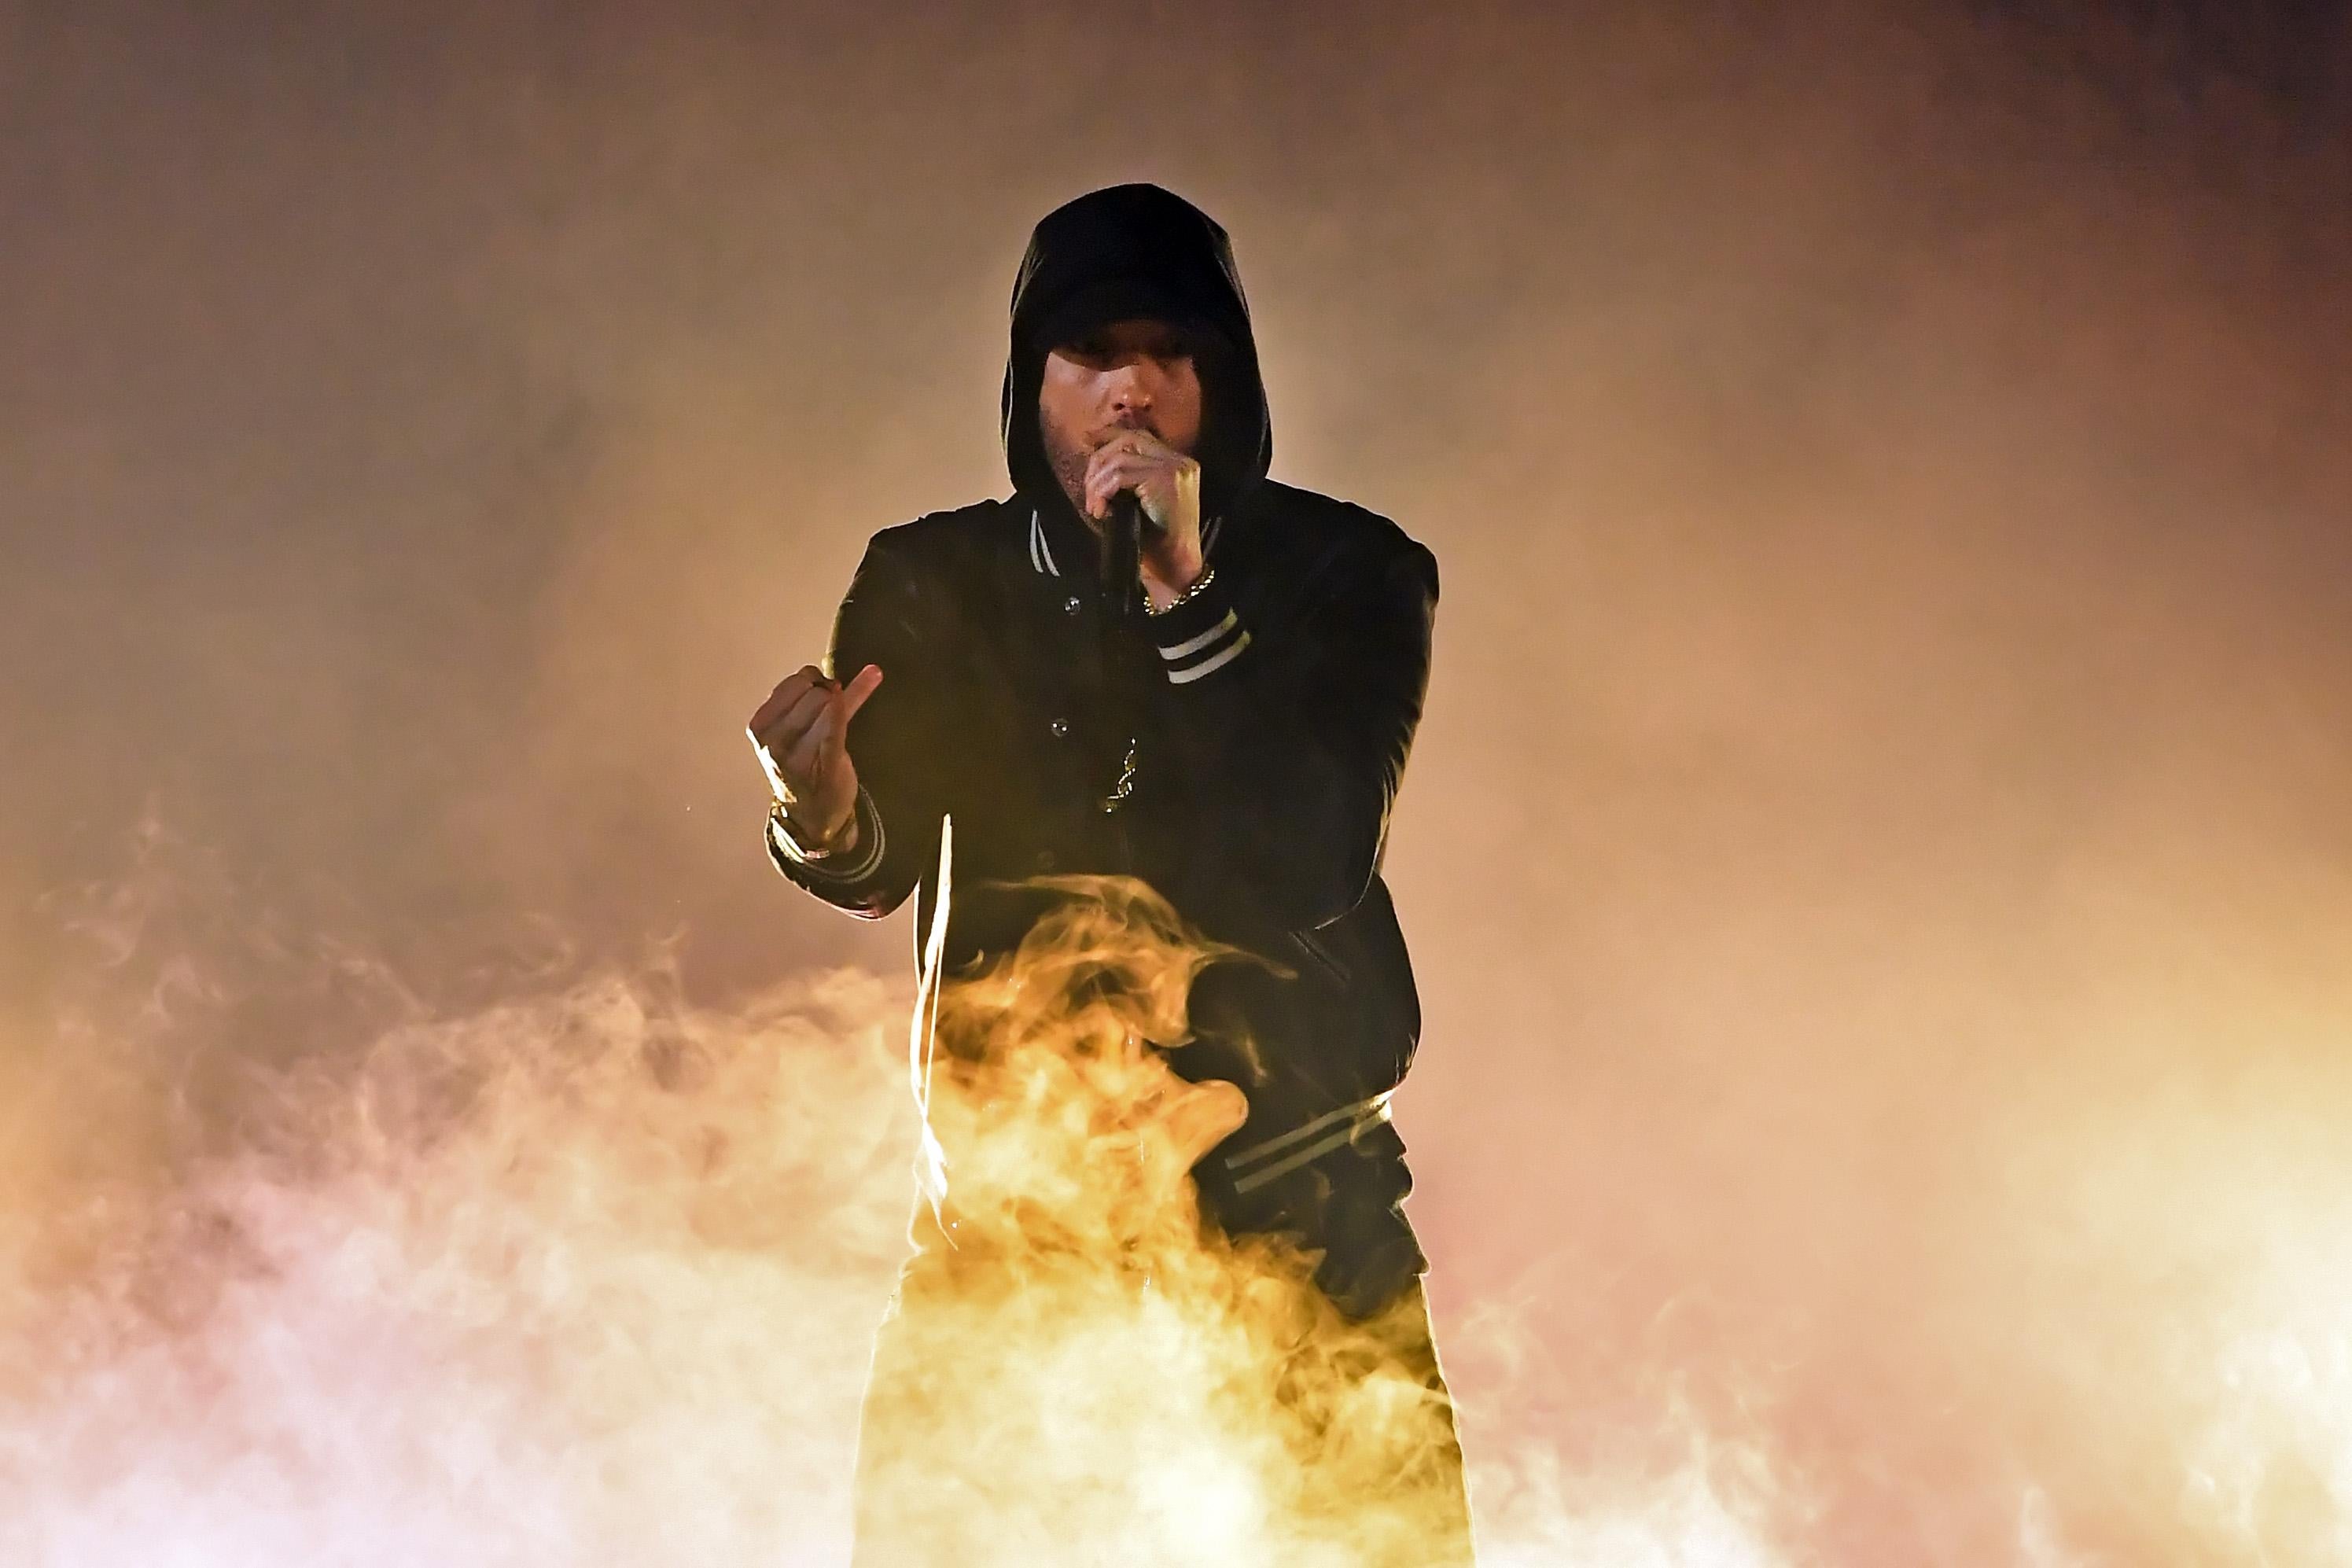 INGLEWOOD, CA - MARCH 11:  Eminem performs onstage during the 2018 iHeartRadio Music Awards which broadcasted live on TBS, TNT, and truTV at The Forum on March 11, 2018 in Inglewood, California.  (Photo by Kevin Winter/Getty Images for iHeartMedia)